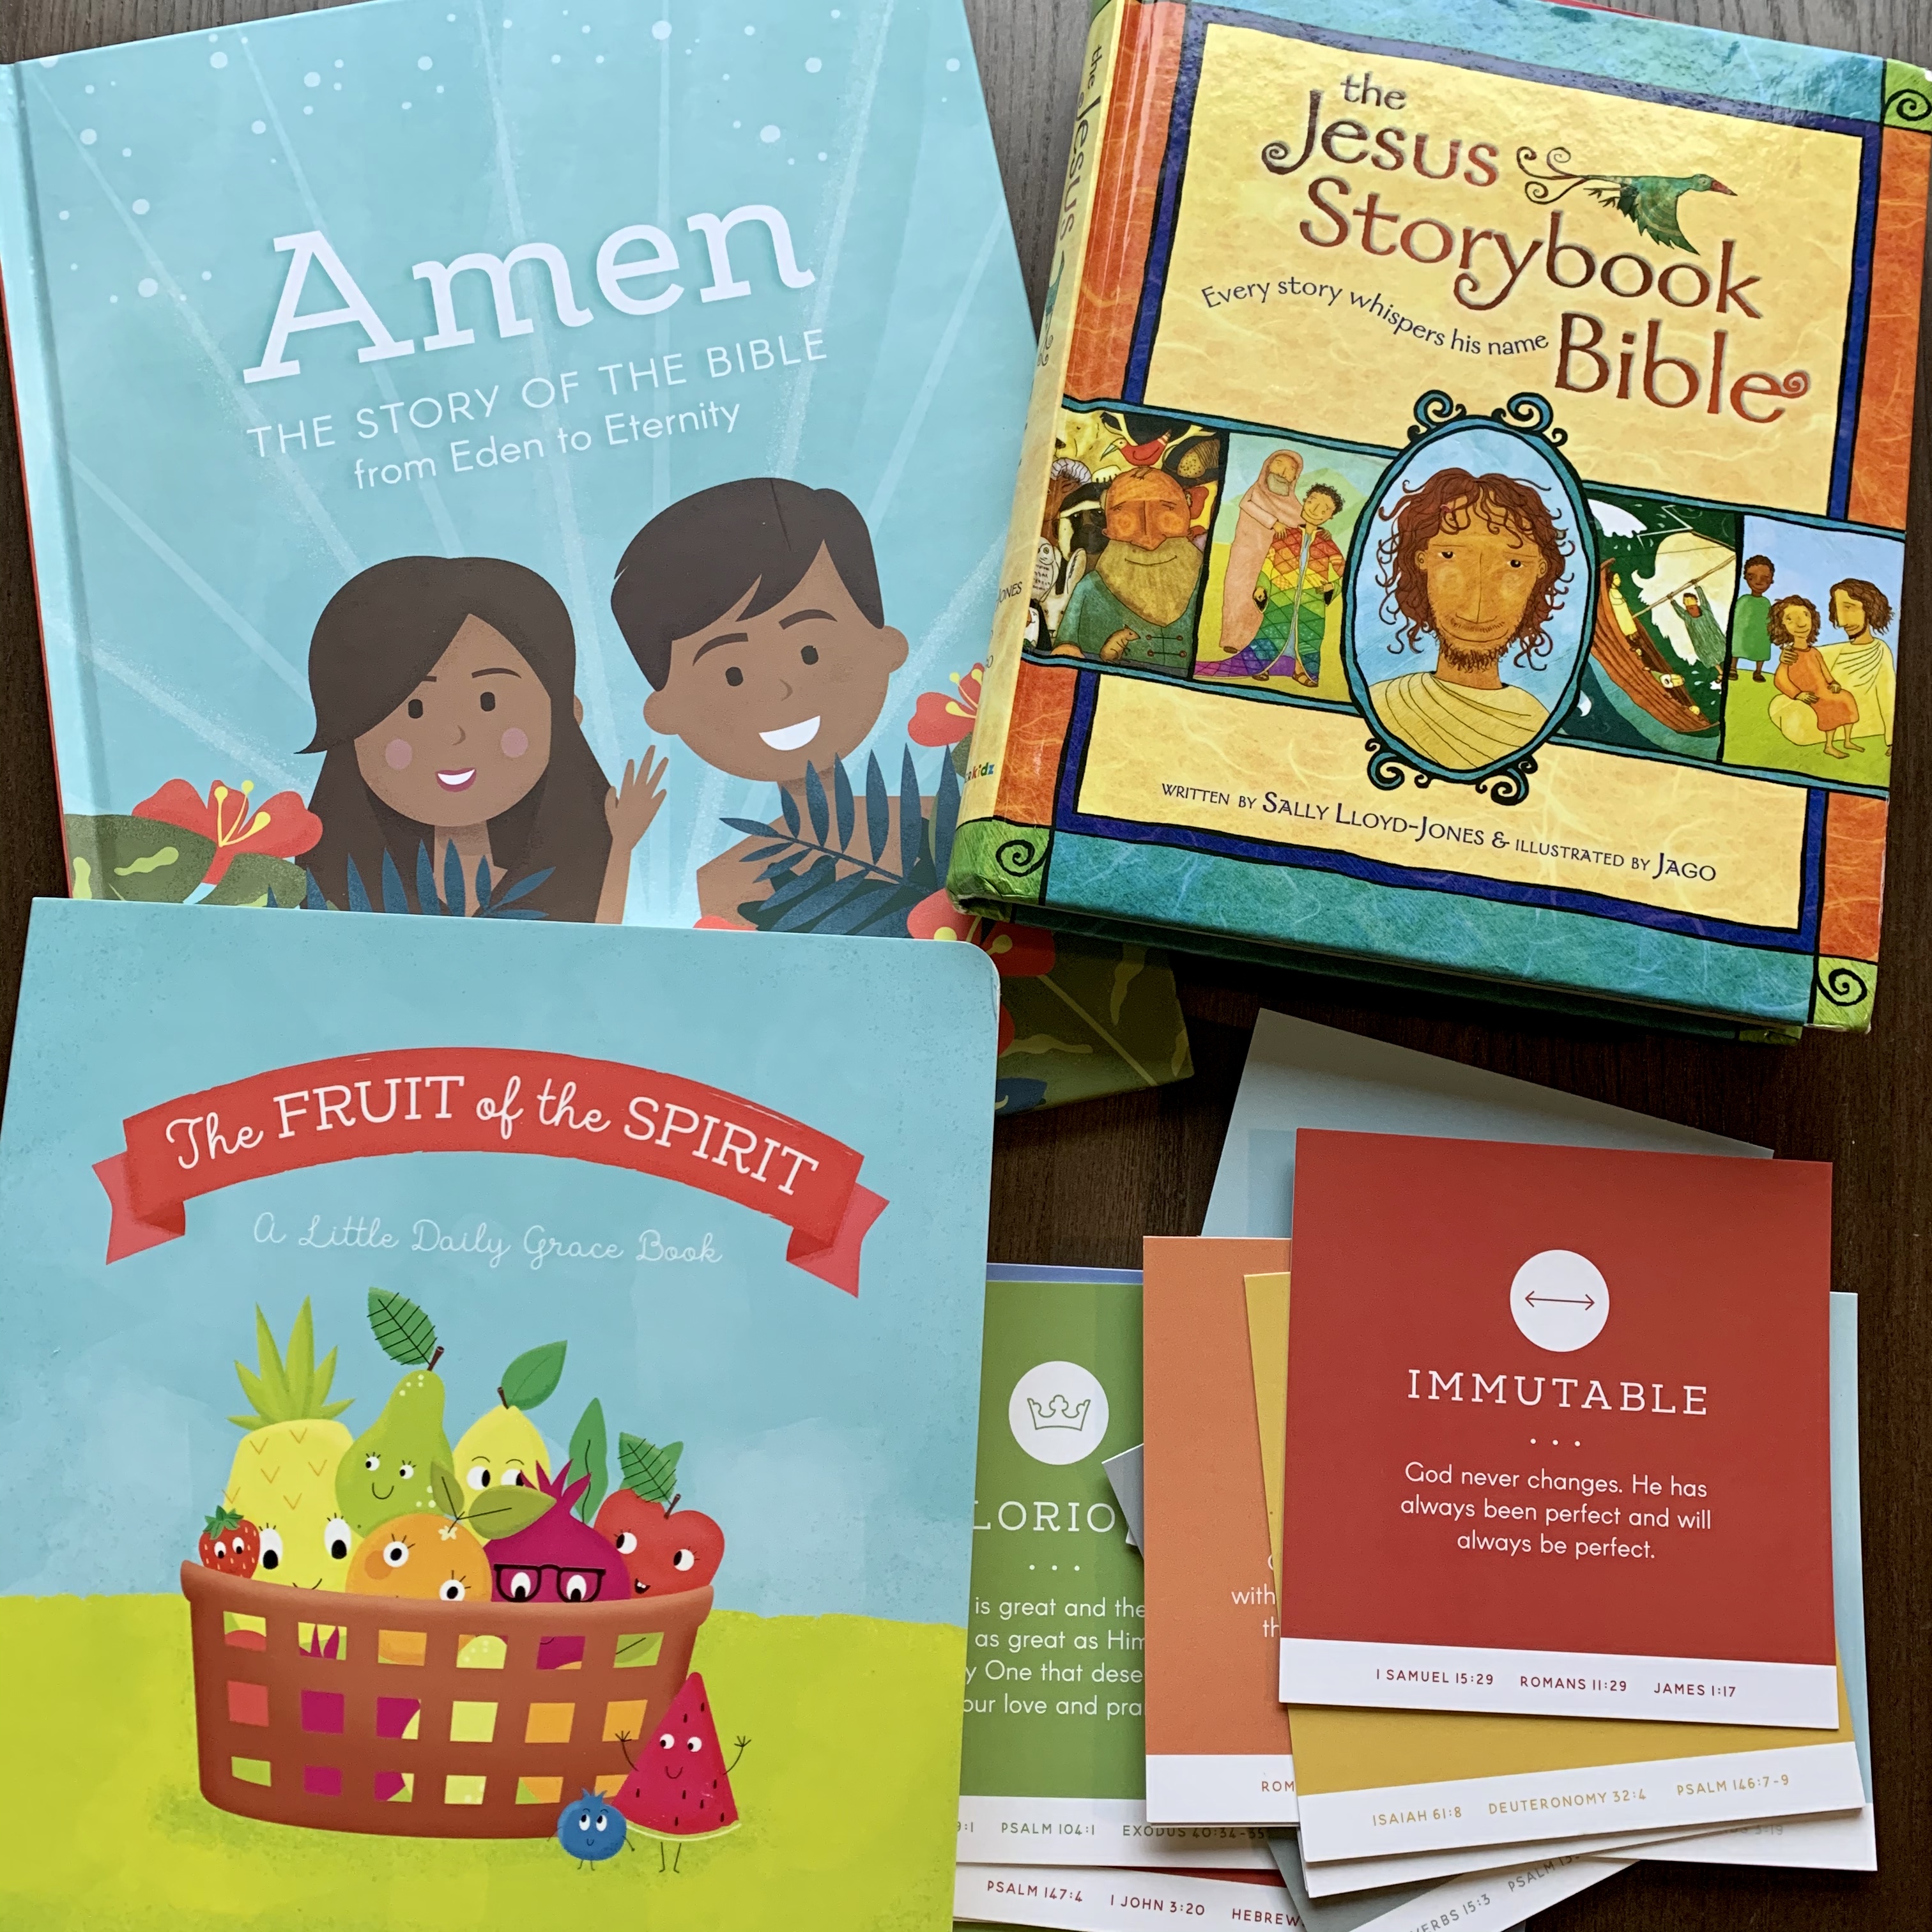 Amazing Bible Study Resources and Books for Children